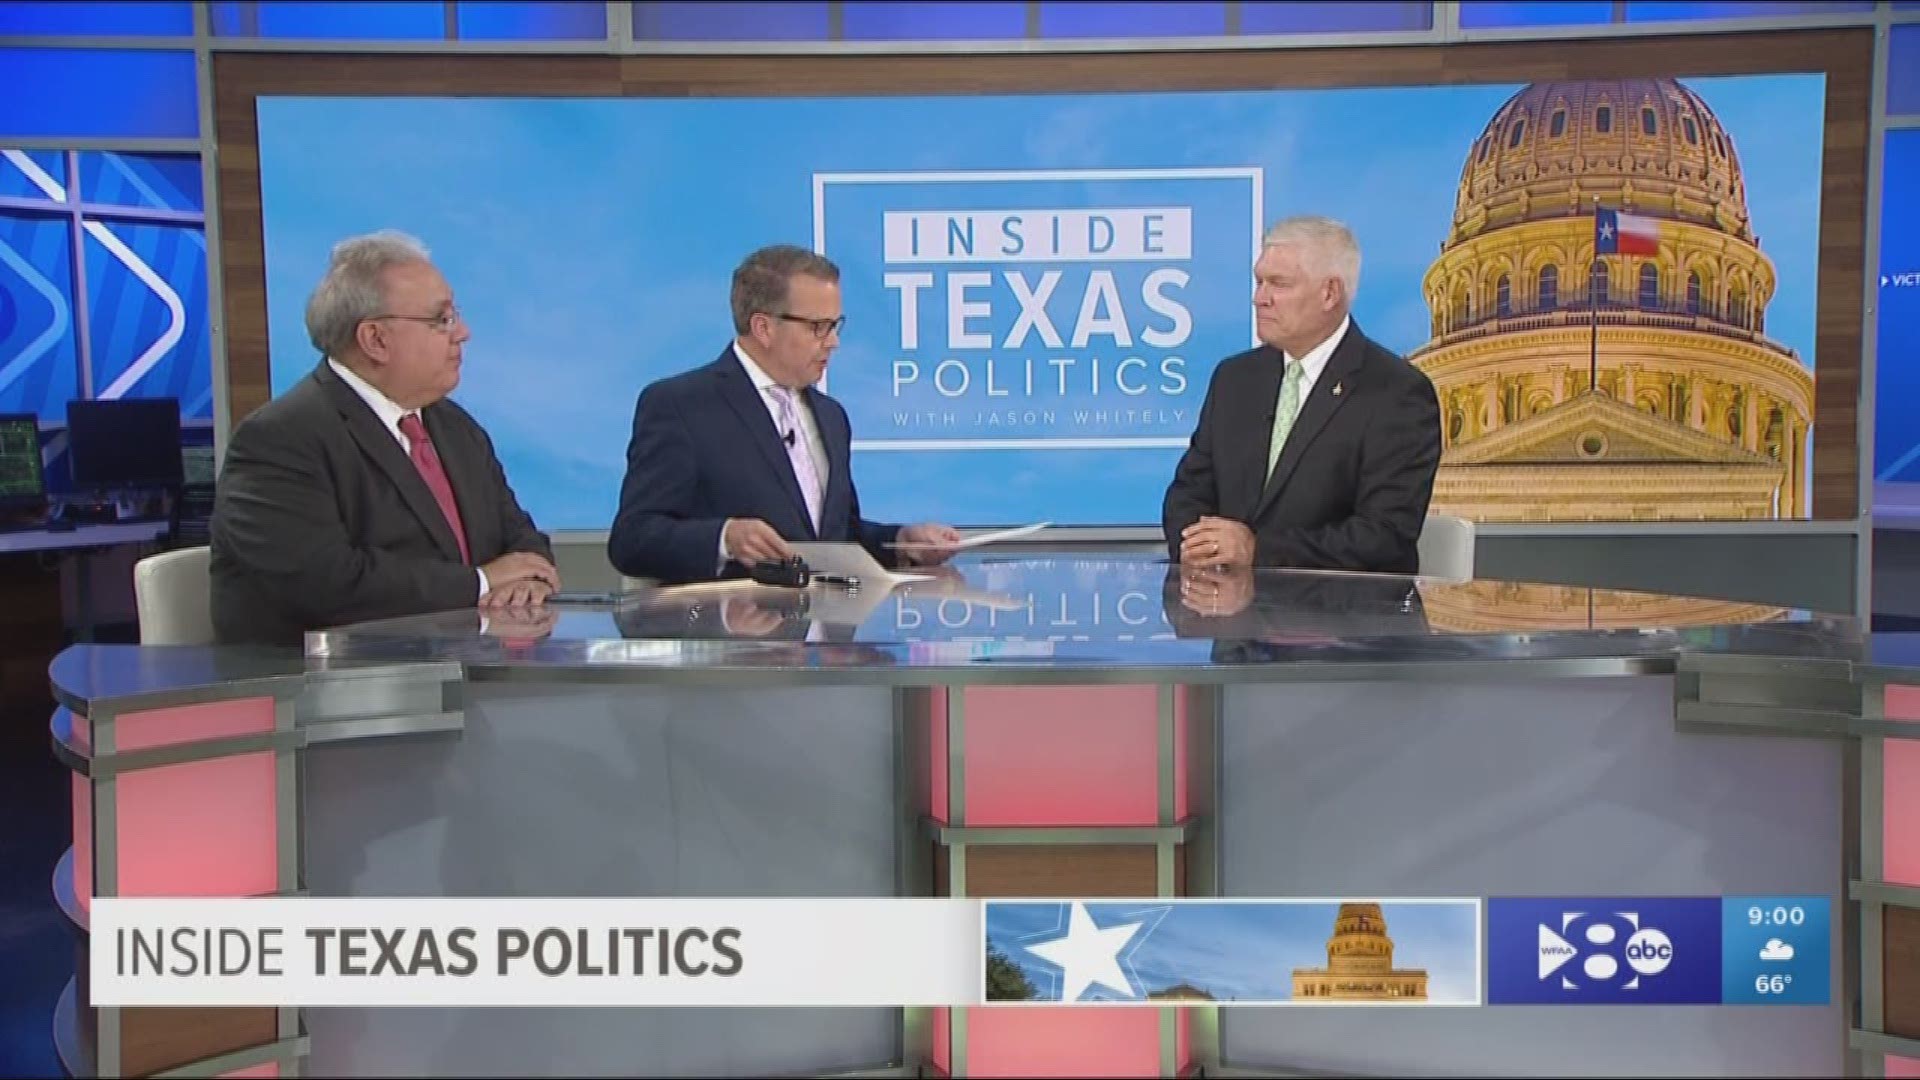 Inside Texas Politics began with the race for Texas Congressional District 32, the most competitive race in North Texas. In his re-election bid, incumbent U.S. Rep. Pete sessions is facing a tough challenge from Democrat Colin Allred. Both Rep. Sessions a